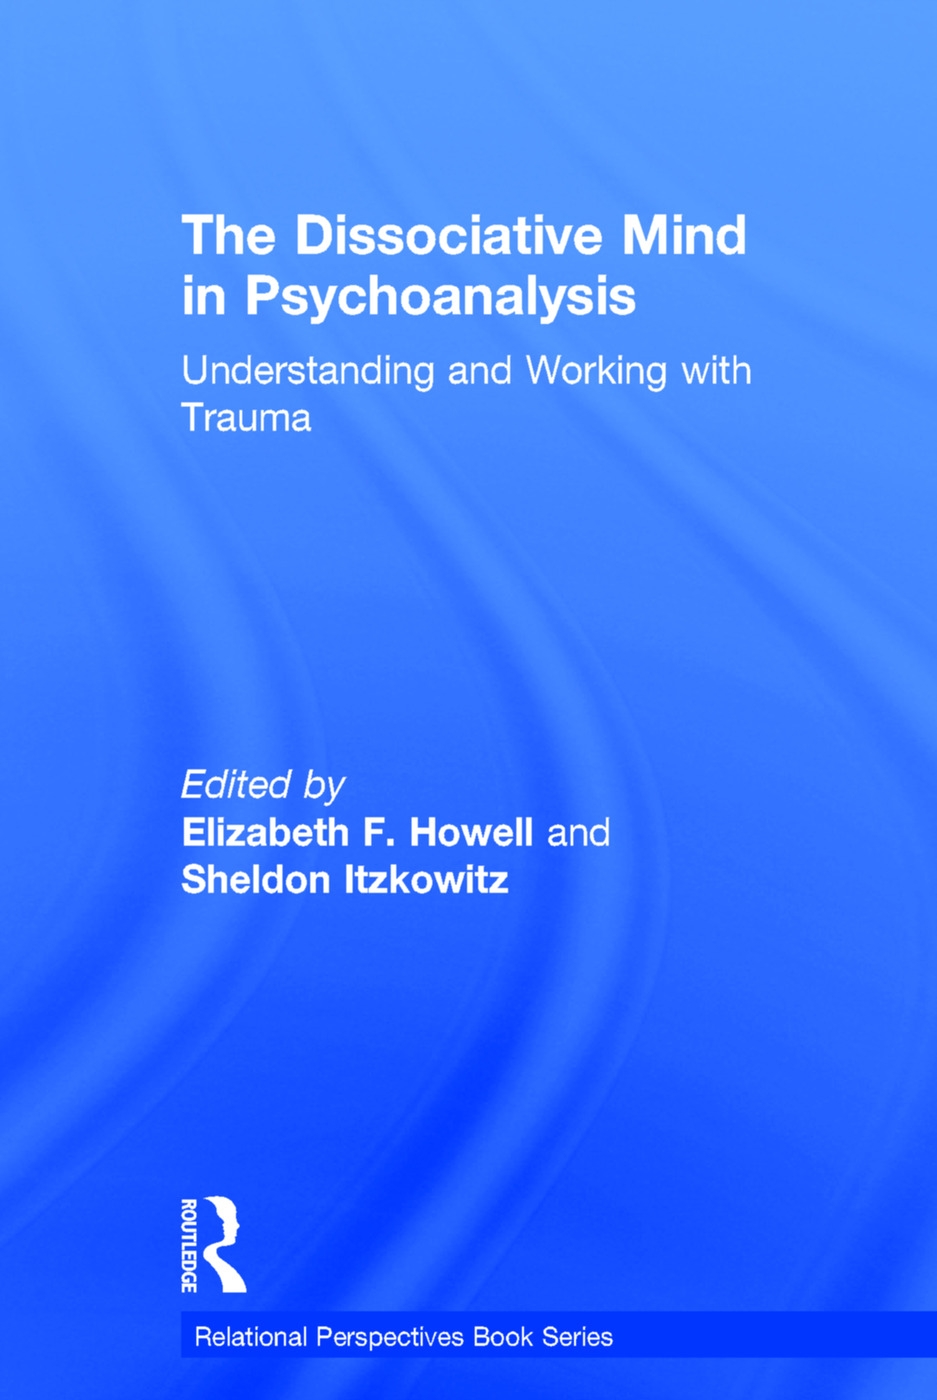 The Dissociative Mind in Psychoanalysis: Understanding and Working With Trauma